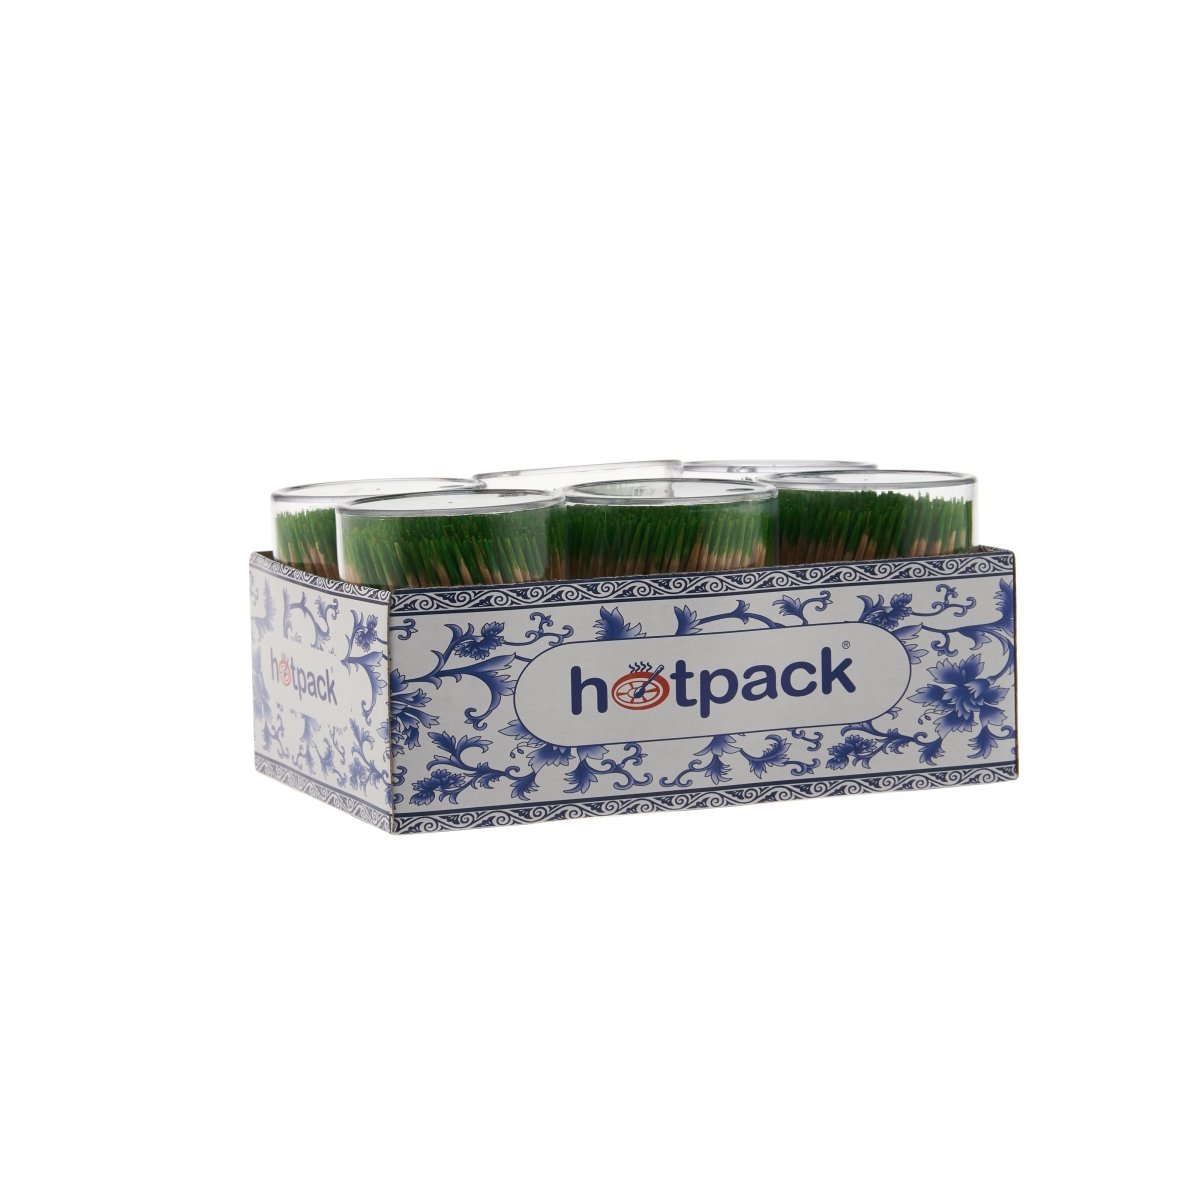 Toothpick with Minted Ends - hotpackwebstore.com - Toothpick